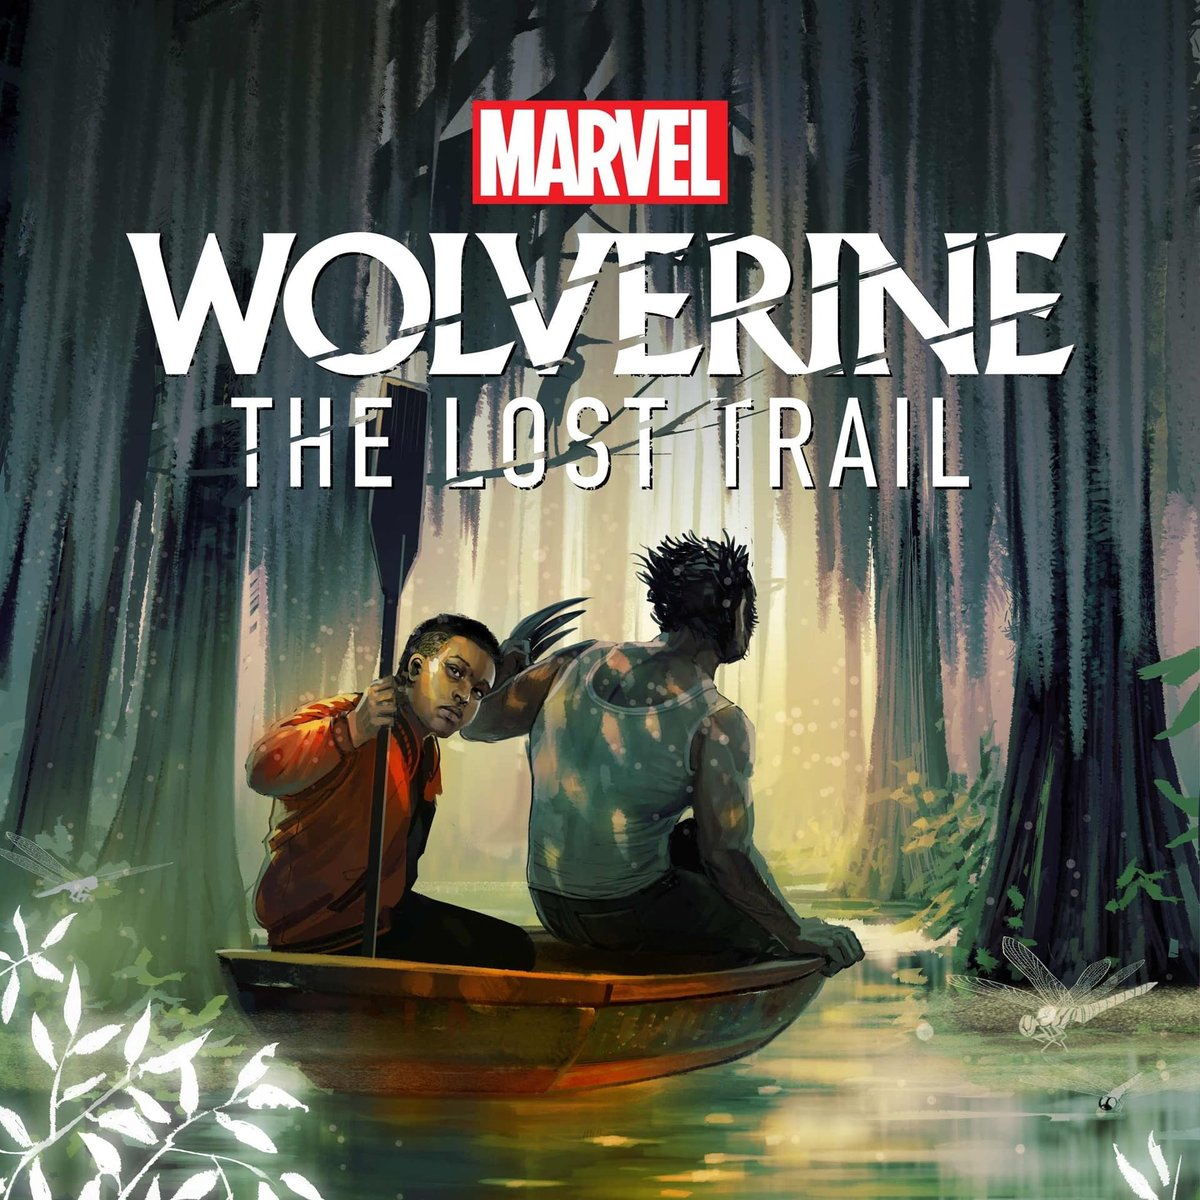 Wolverine: The Lost Trail art, Wolverine and another mutant in a boat within a swamp.